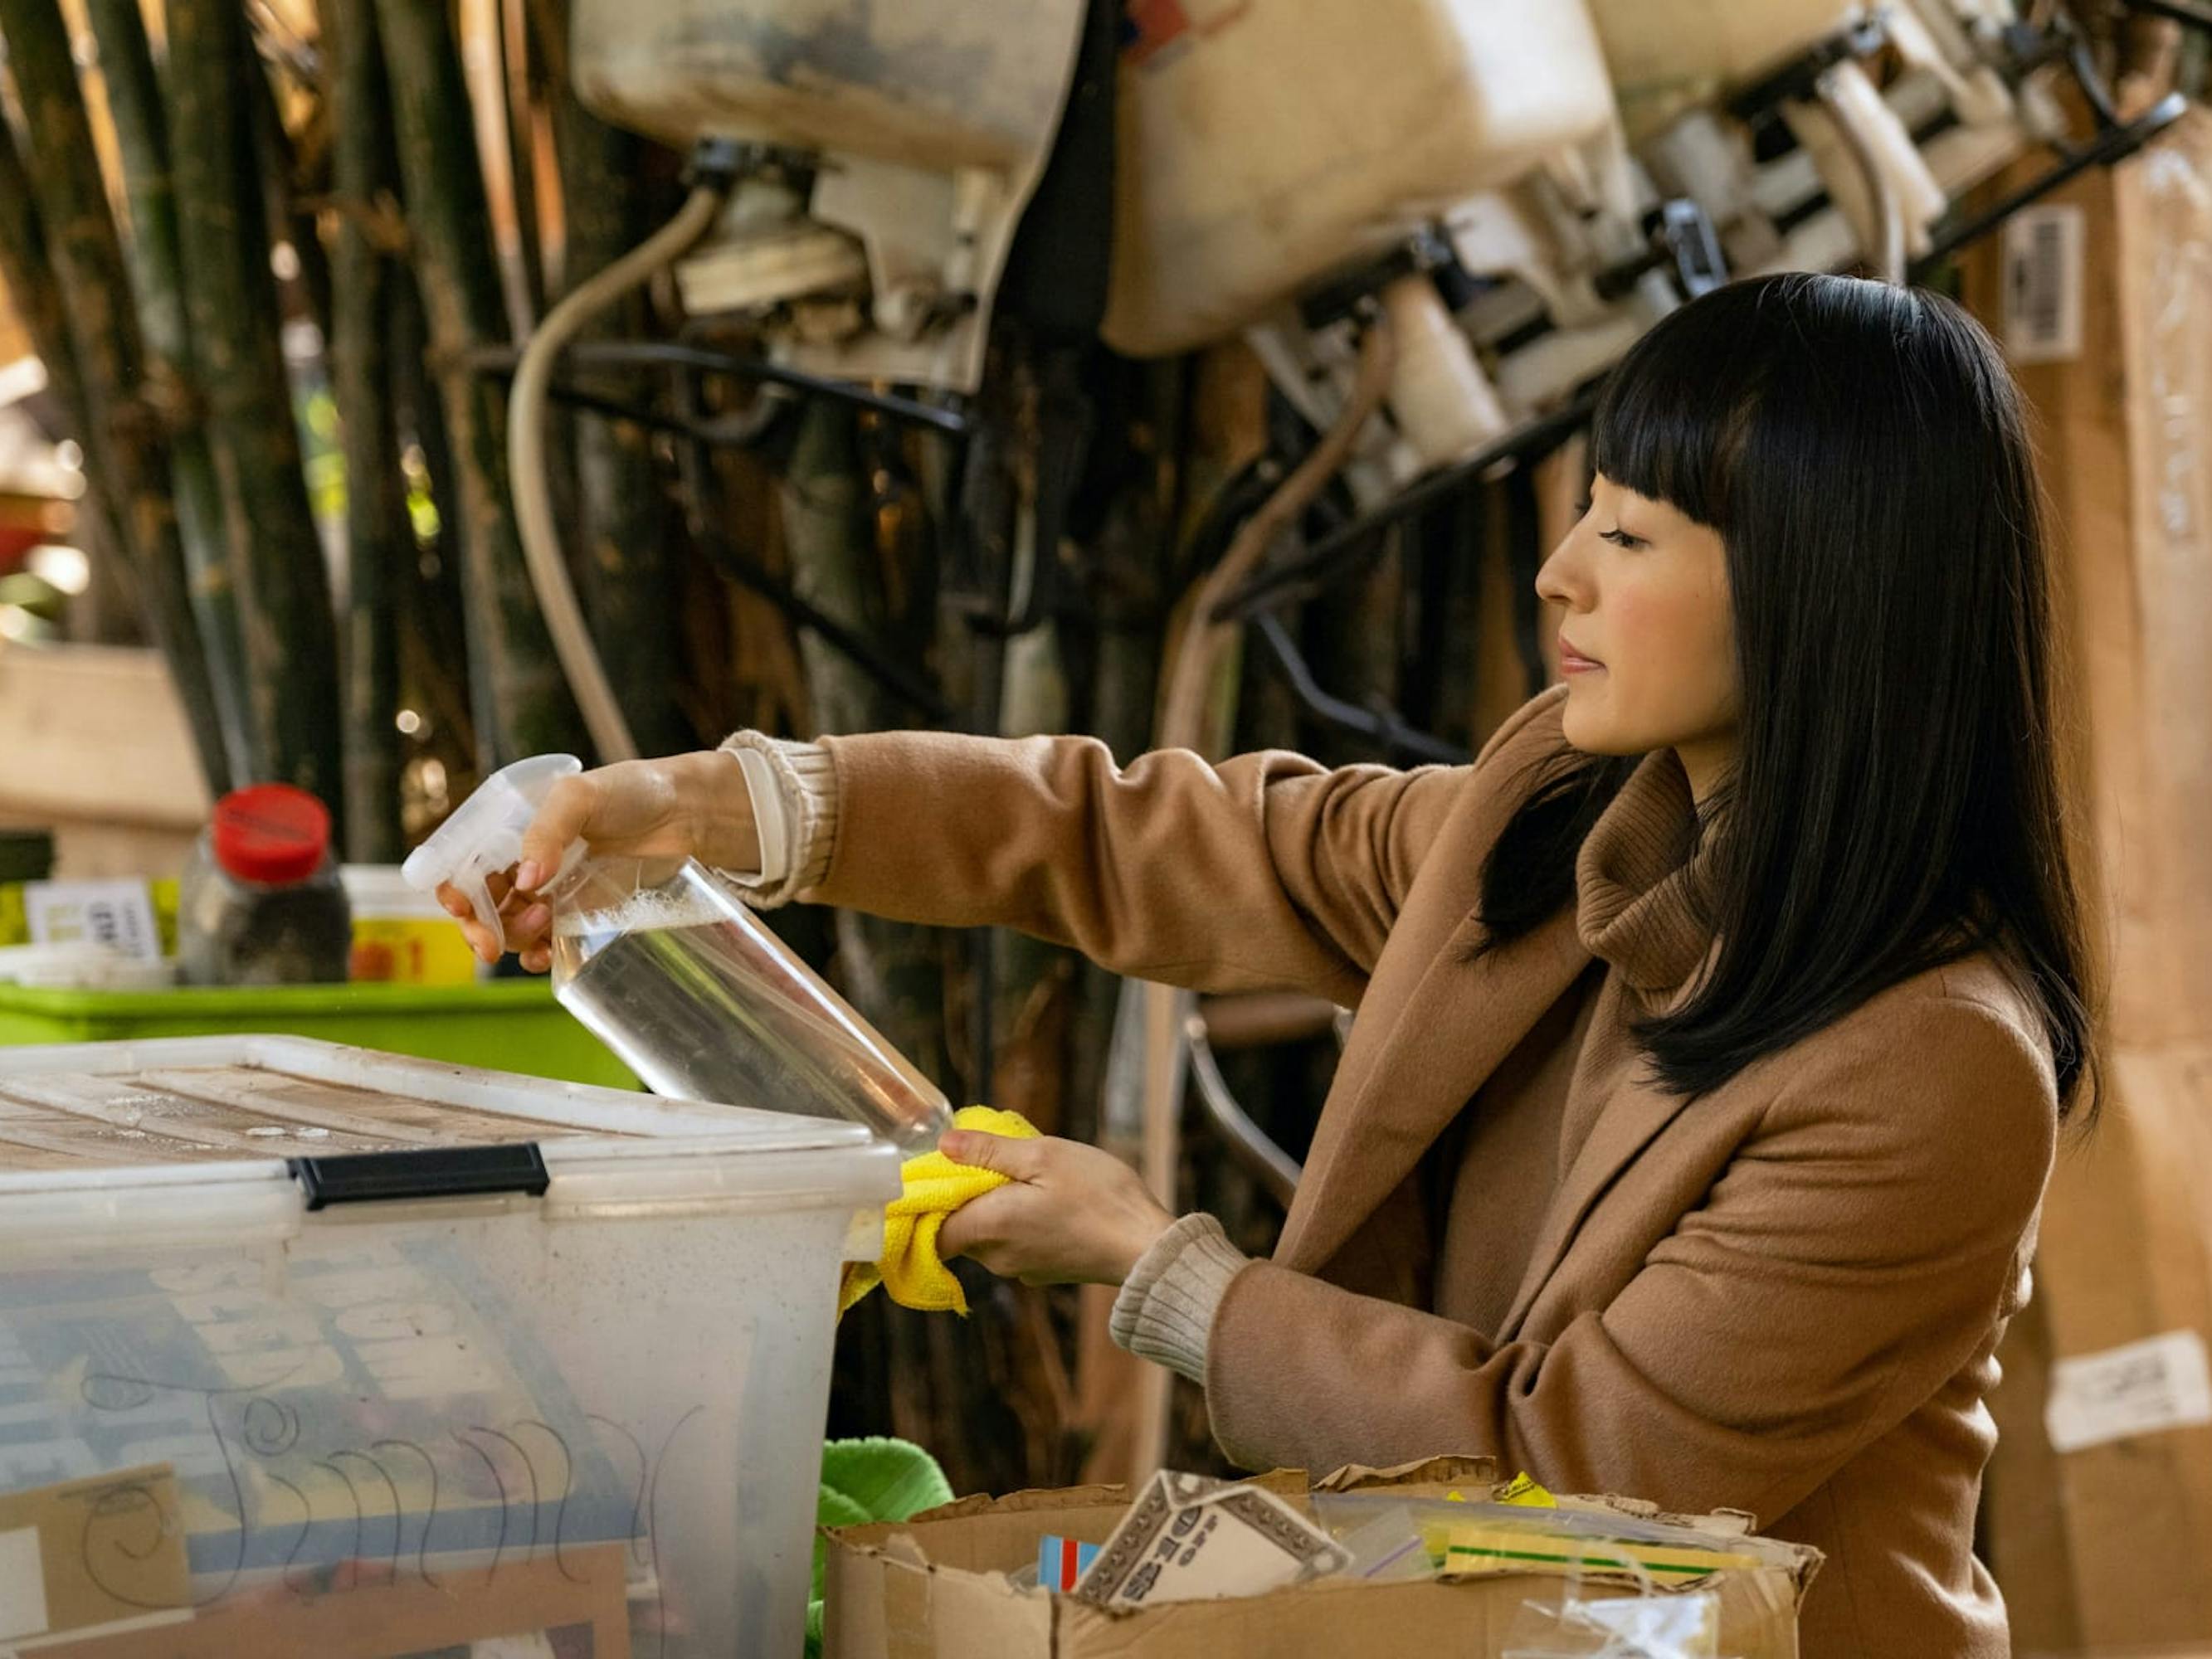 Marie Kondo uses a spray bottle to clean the top of a plastic storage bin coated in a thick layer of dust in a space filled with boxes and industrial equipment.